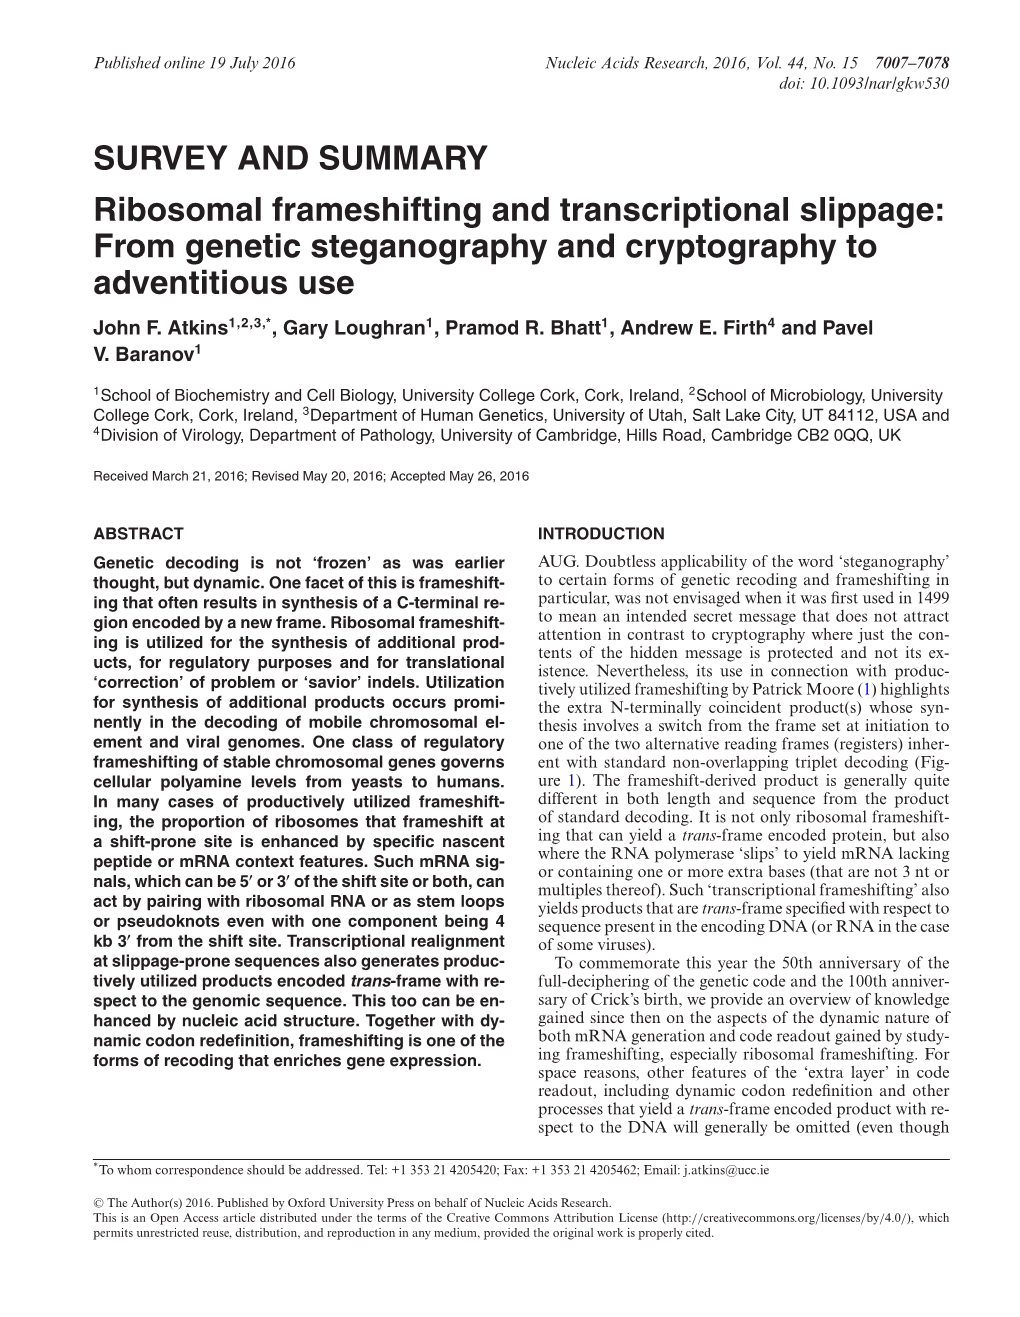 SURVEY and SUMMARY Ribosomal Frameshifting and Transcriptional Slippage: from Genetic Steganography and Cryptography to Adventitious Use John F